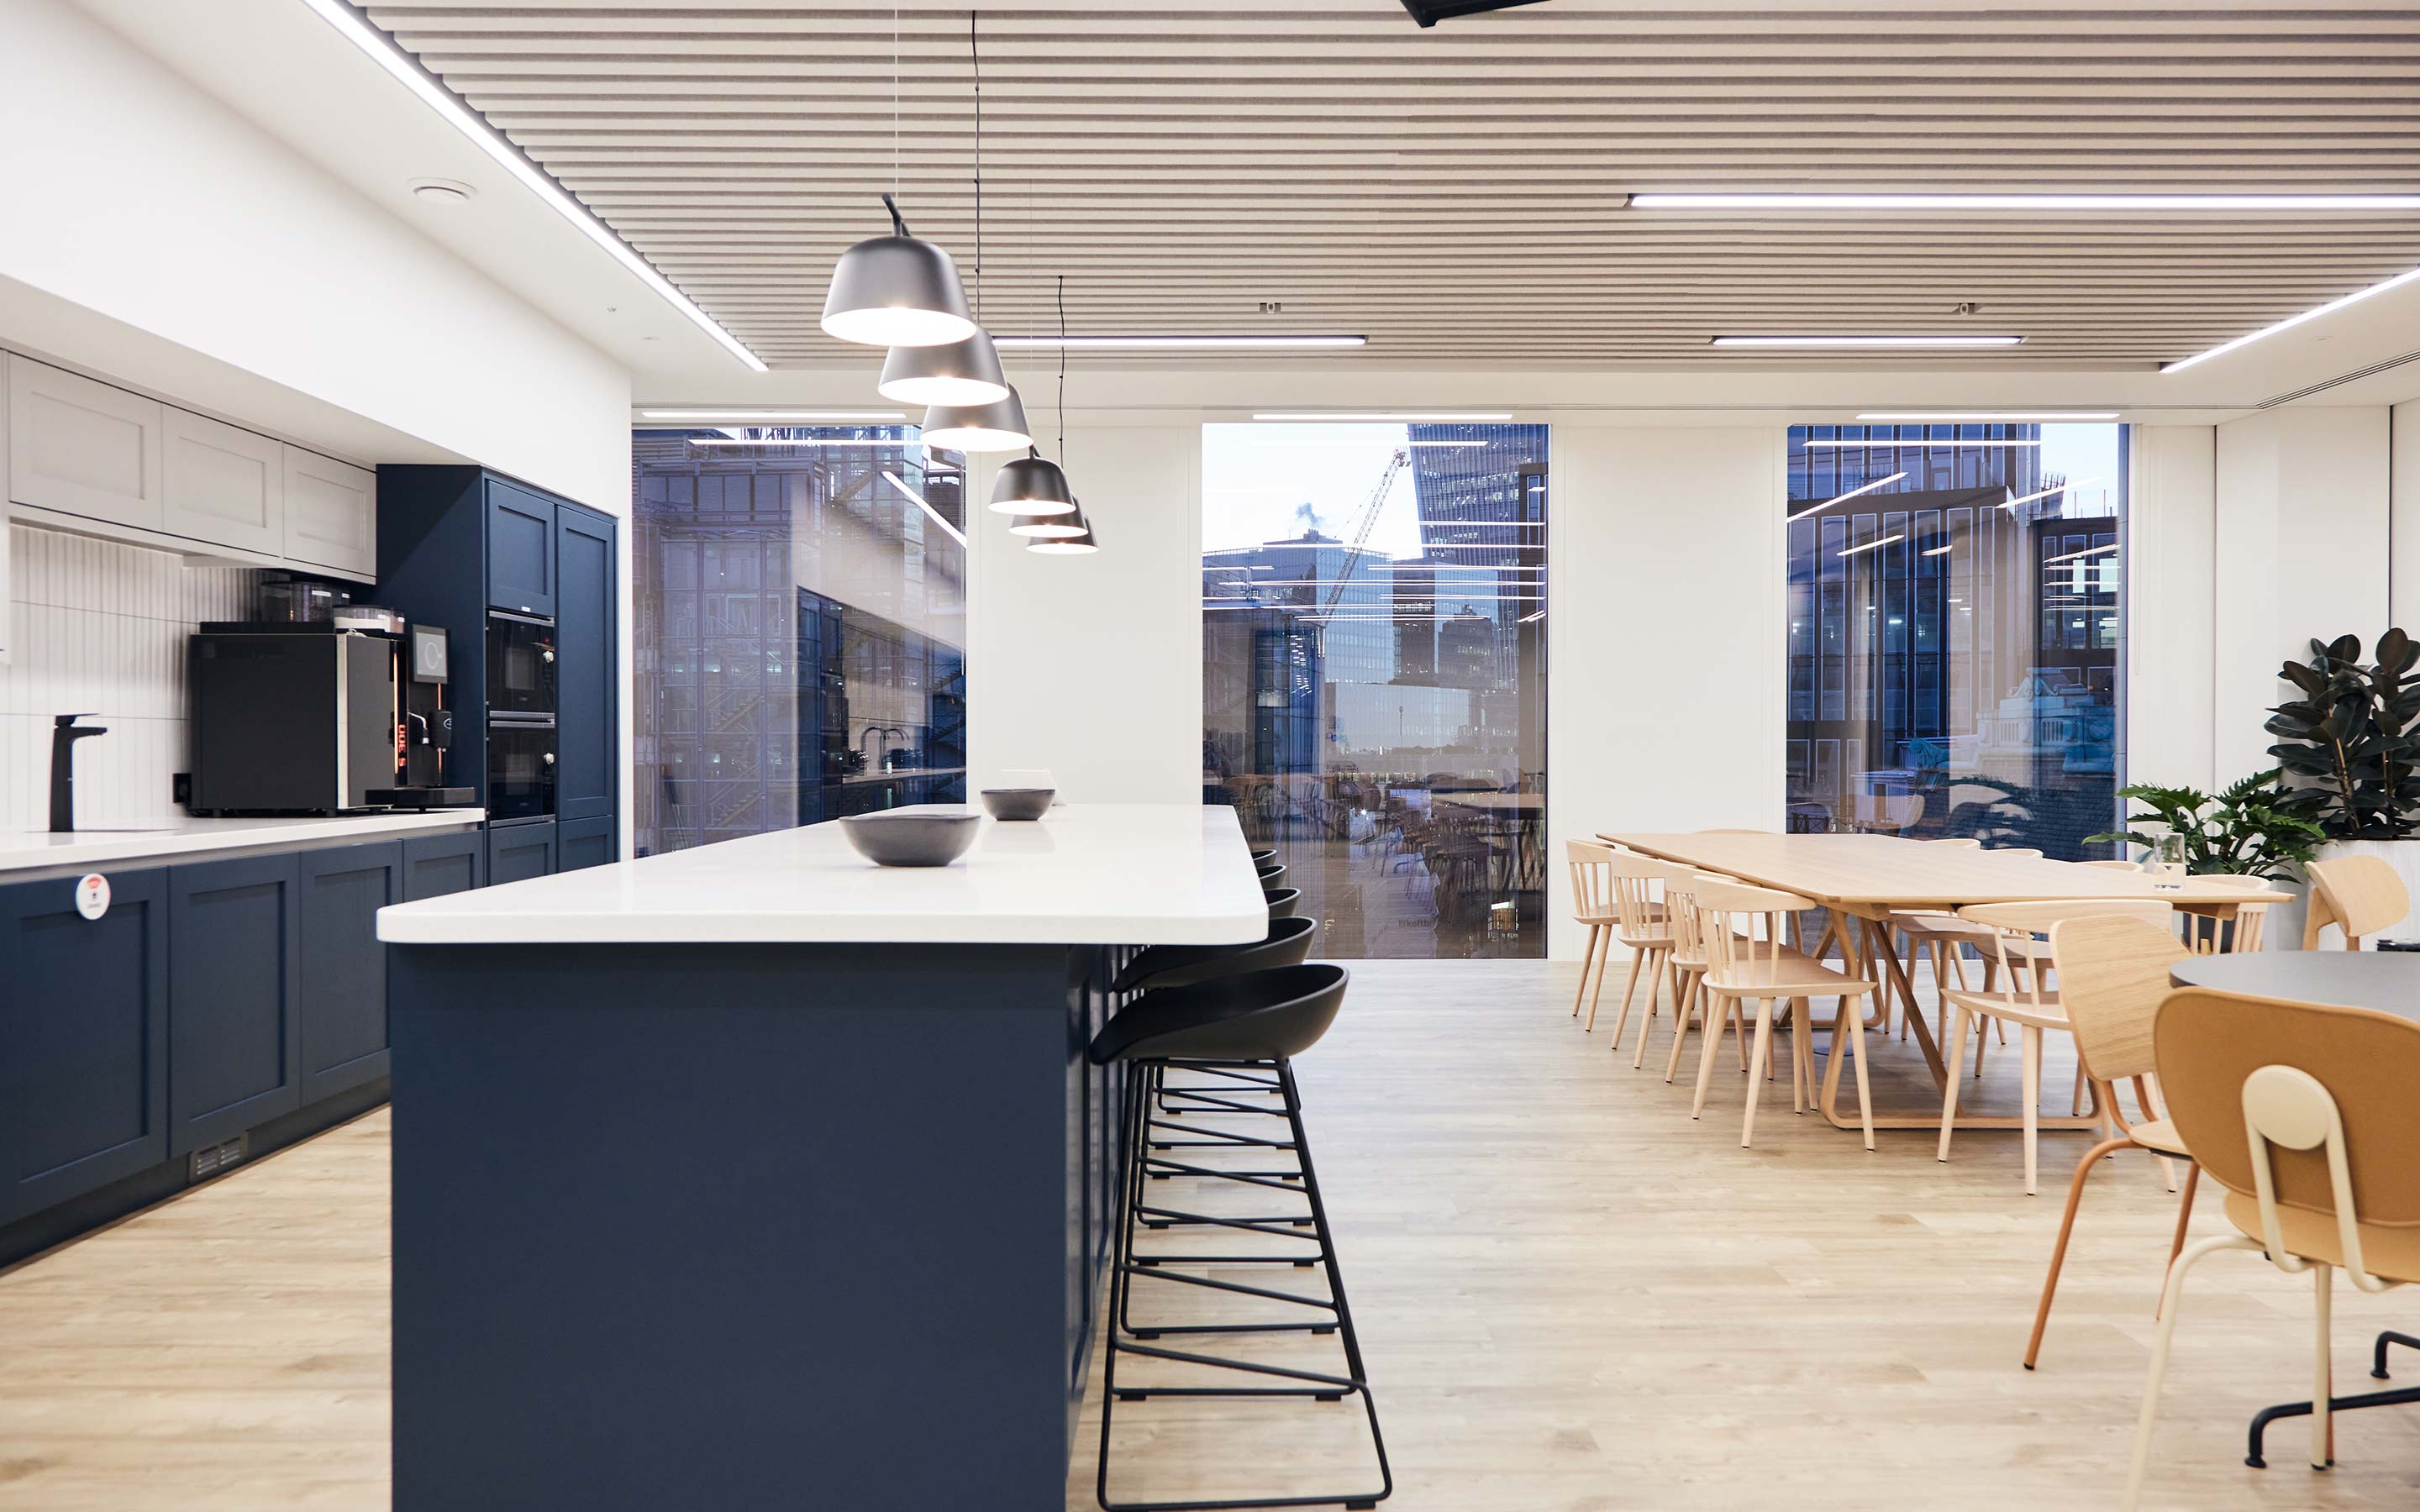 A spacious, bright office teapoint with navy cabinets, a breakfast bar and large wooden kitchen table